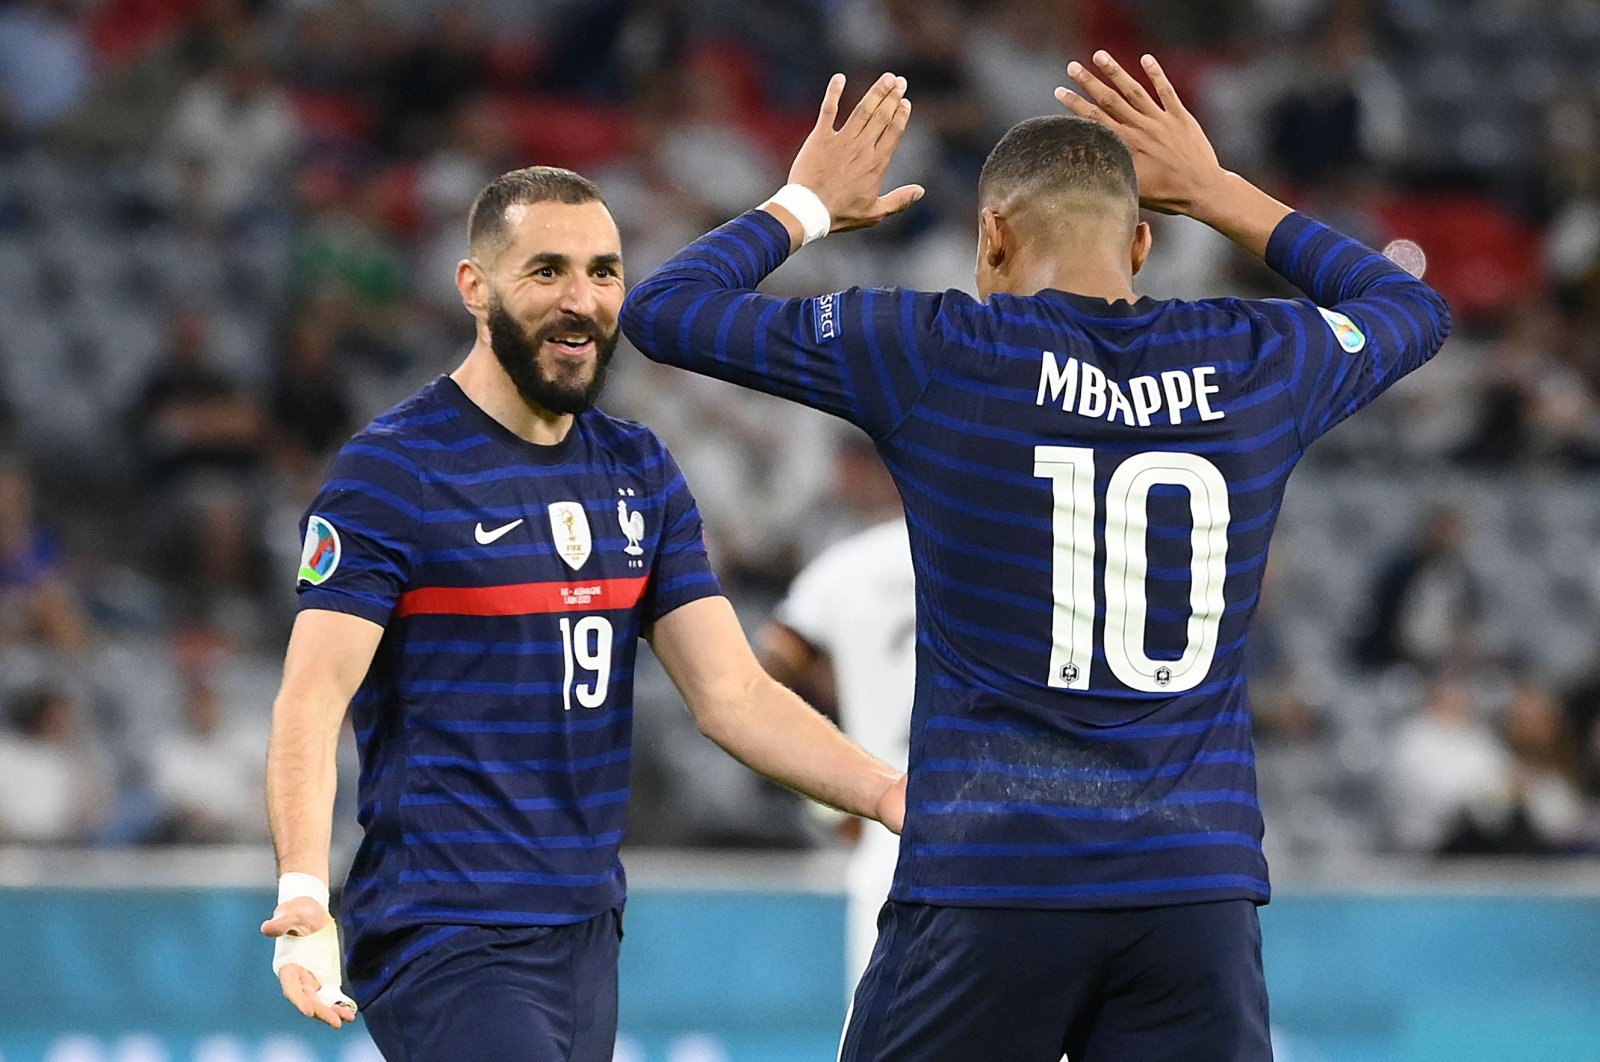 France's forward Karim Benzema (L) celebrates with France's forward Kylian Mbappe after scoring, before it was later revoked due to offside, during the UEFA EURO 2020 Group F football match between France and Germany at the Allianz Arena in Munich on June 15, 2021. (AFP Photo)